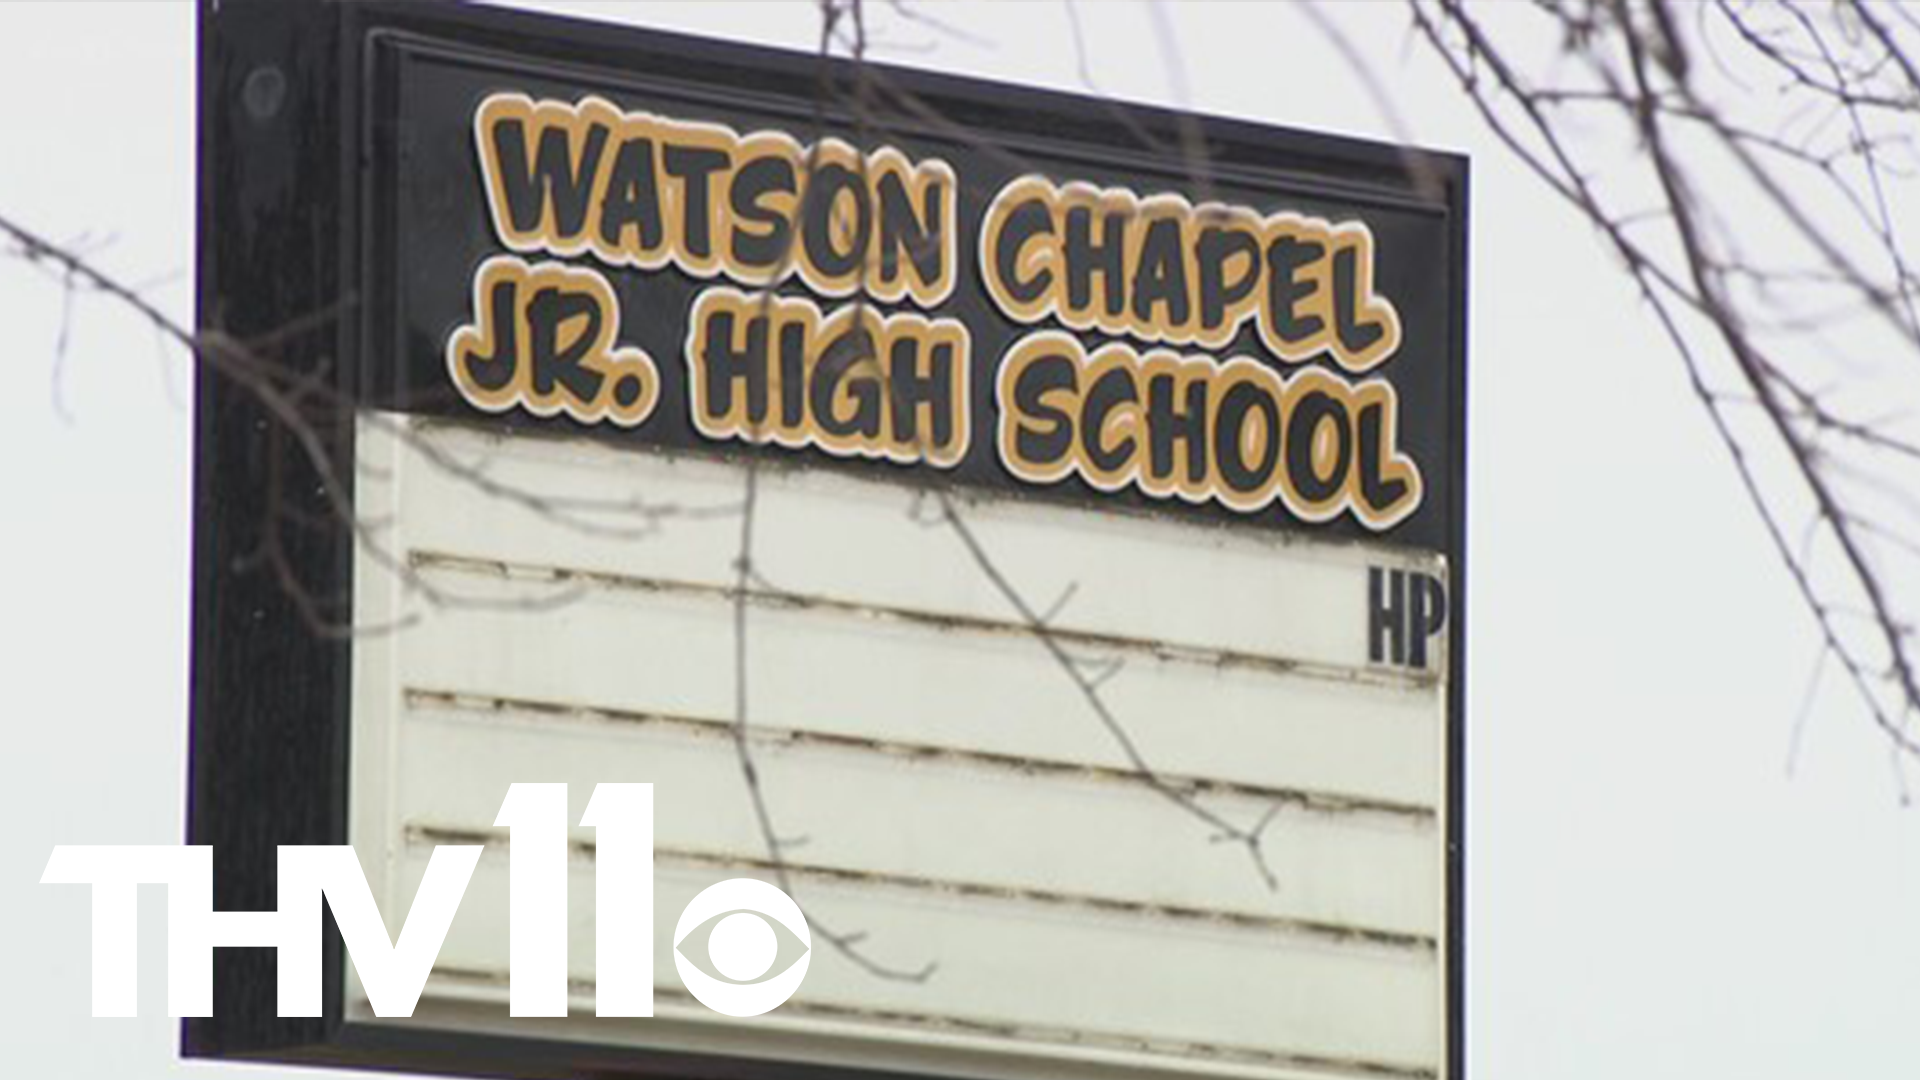 School is virtually back in session after the shooting of a 15-year-old Watson Chapel student. Parents and students feel it's too soon to be back, even virtually.